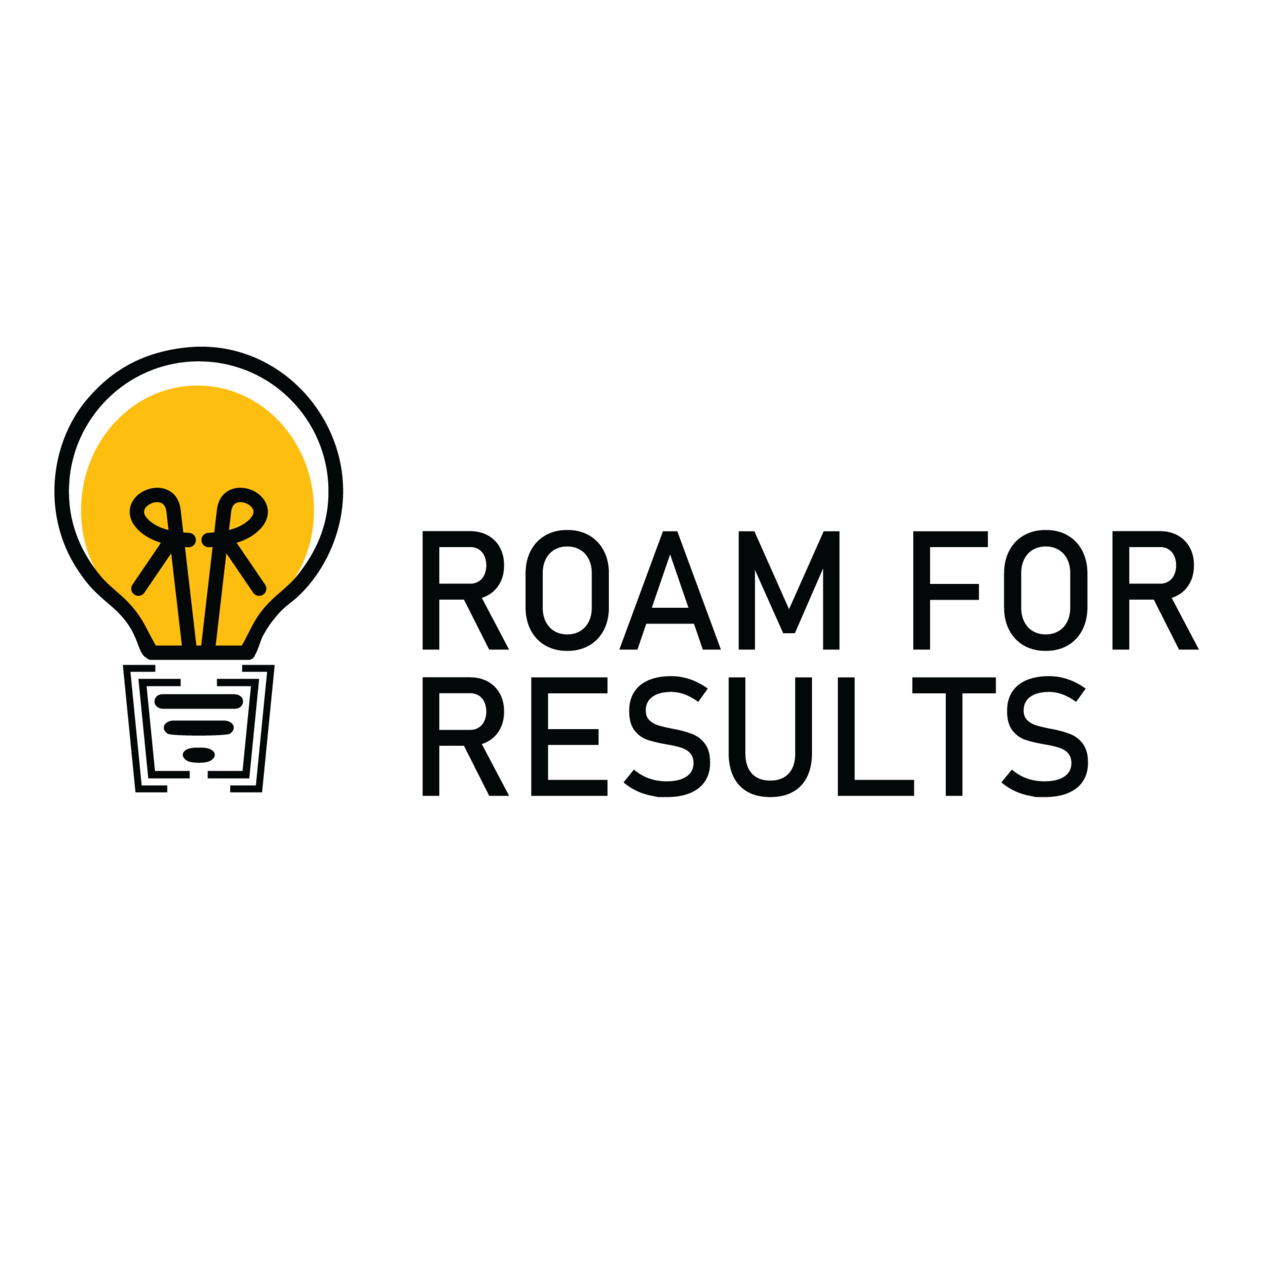 Roam for Results